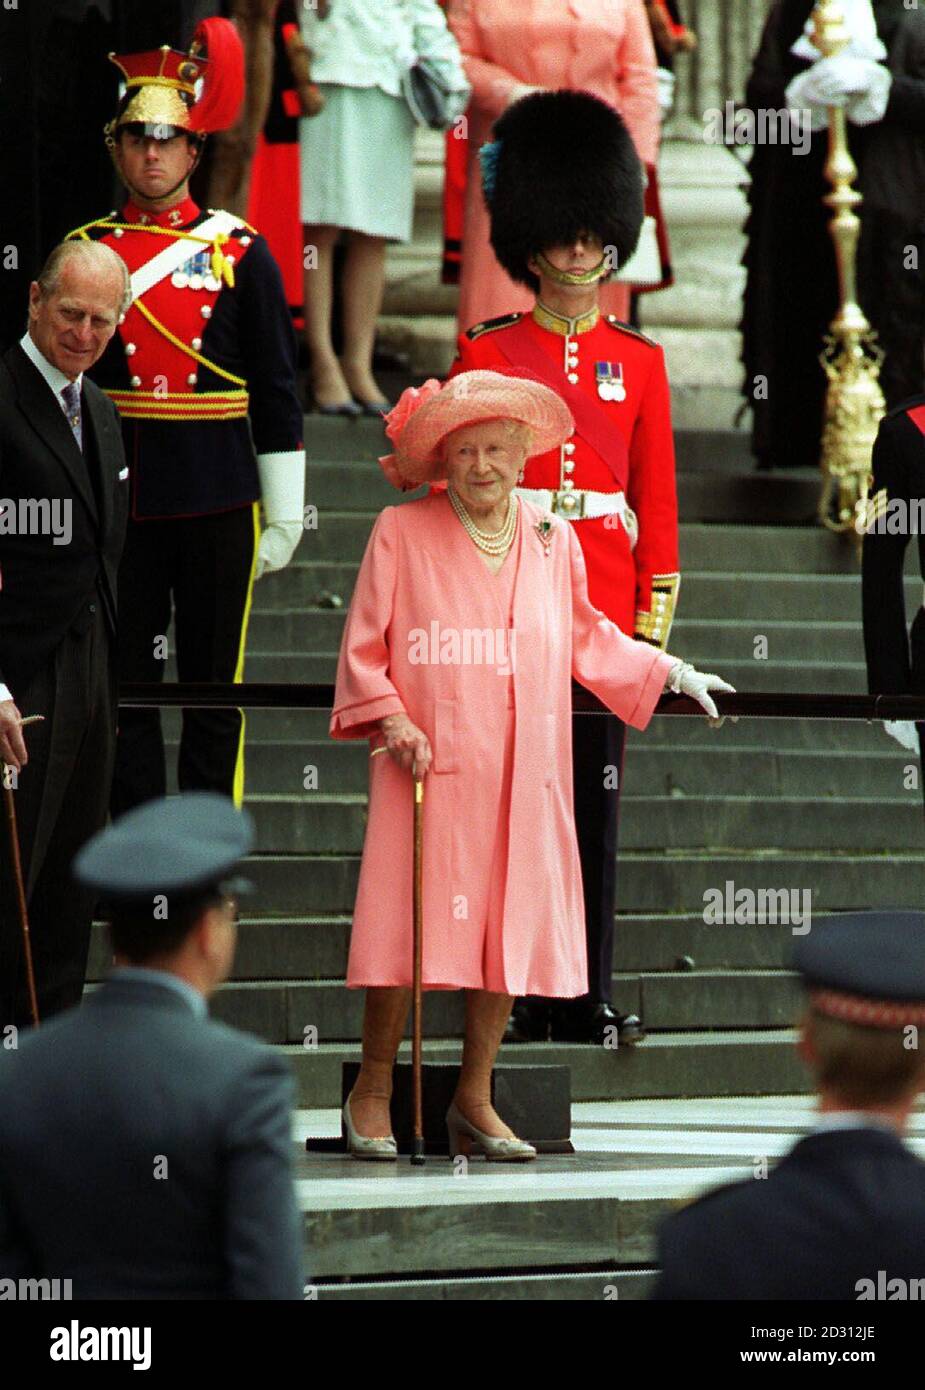 The Queen Mother leaving St Paul's Cathedral in London after attending a service to commemorate her 100th birthday, which is in August 2000. Stock Photo